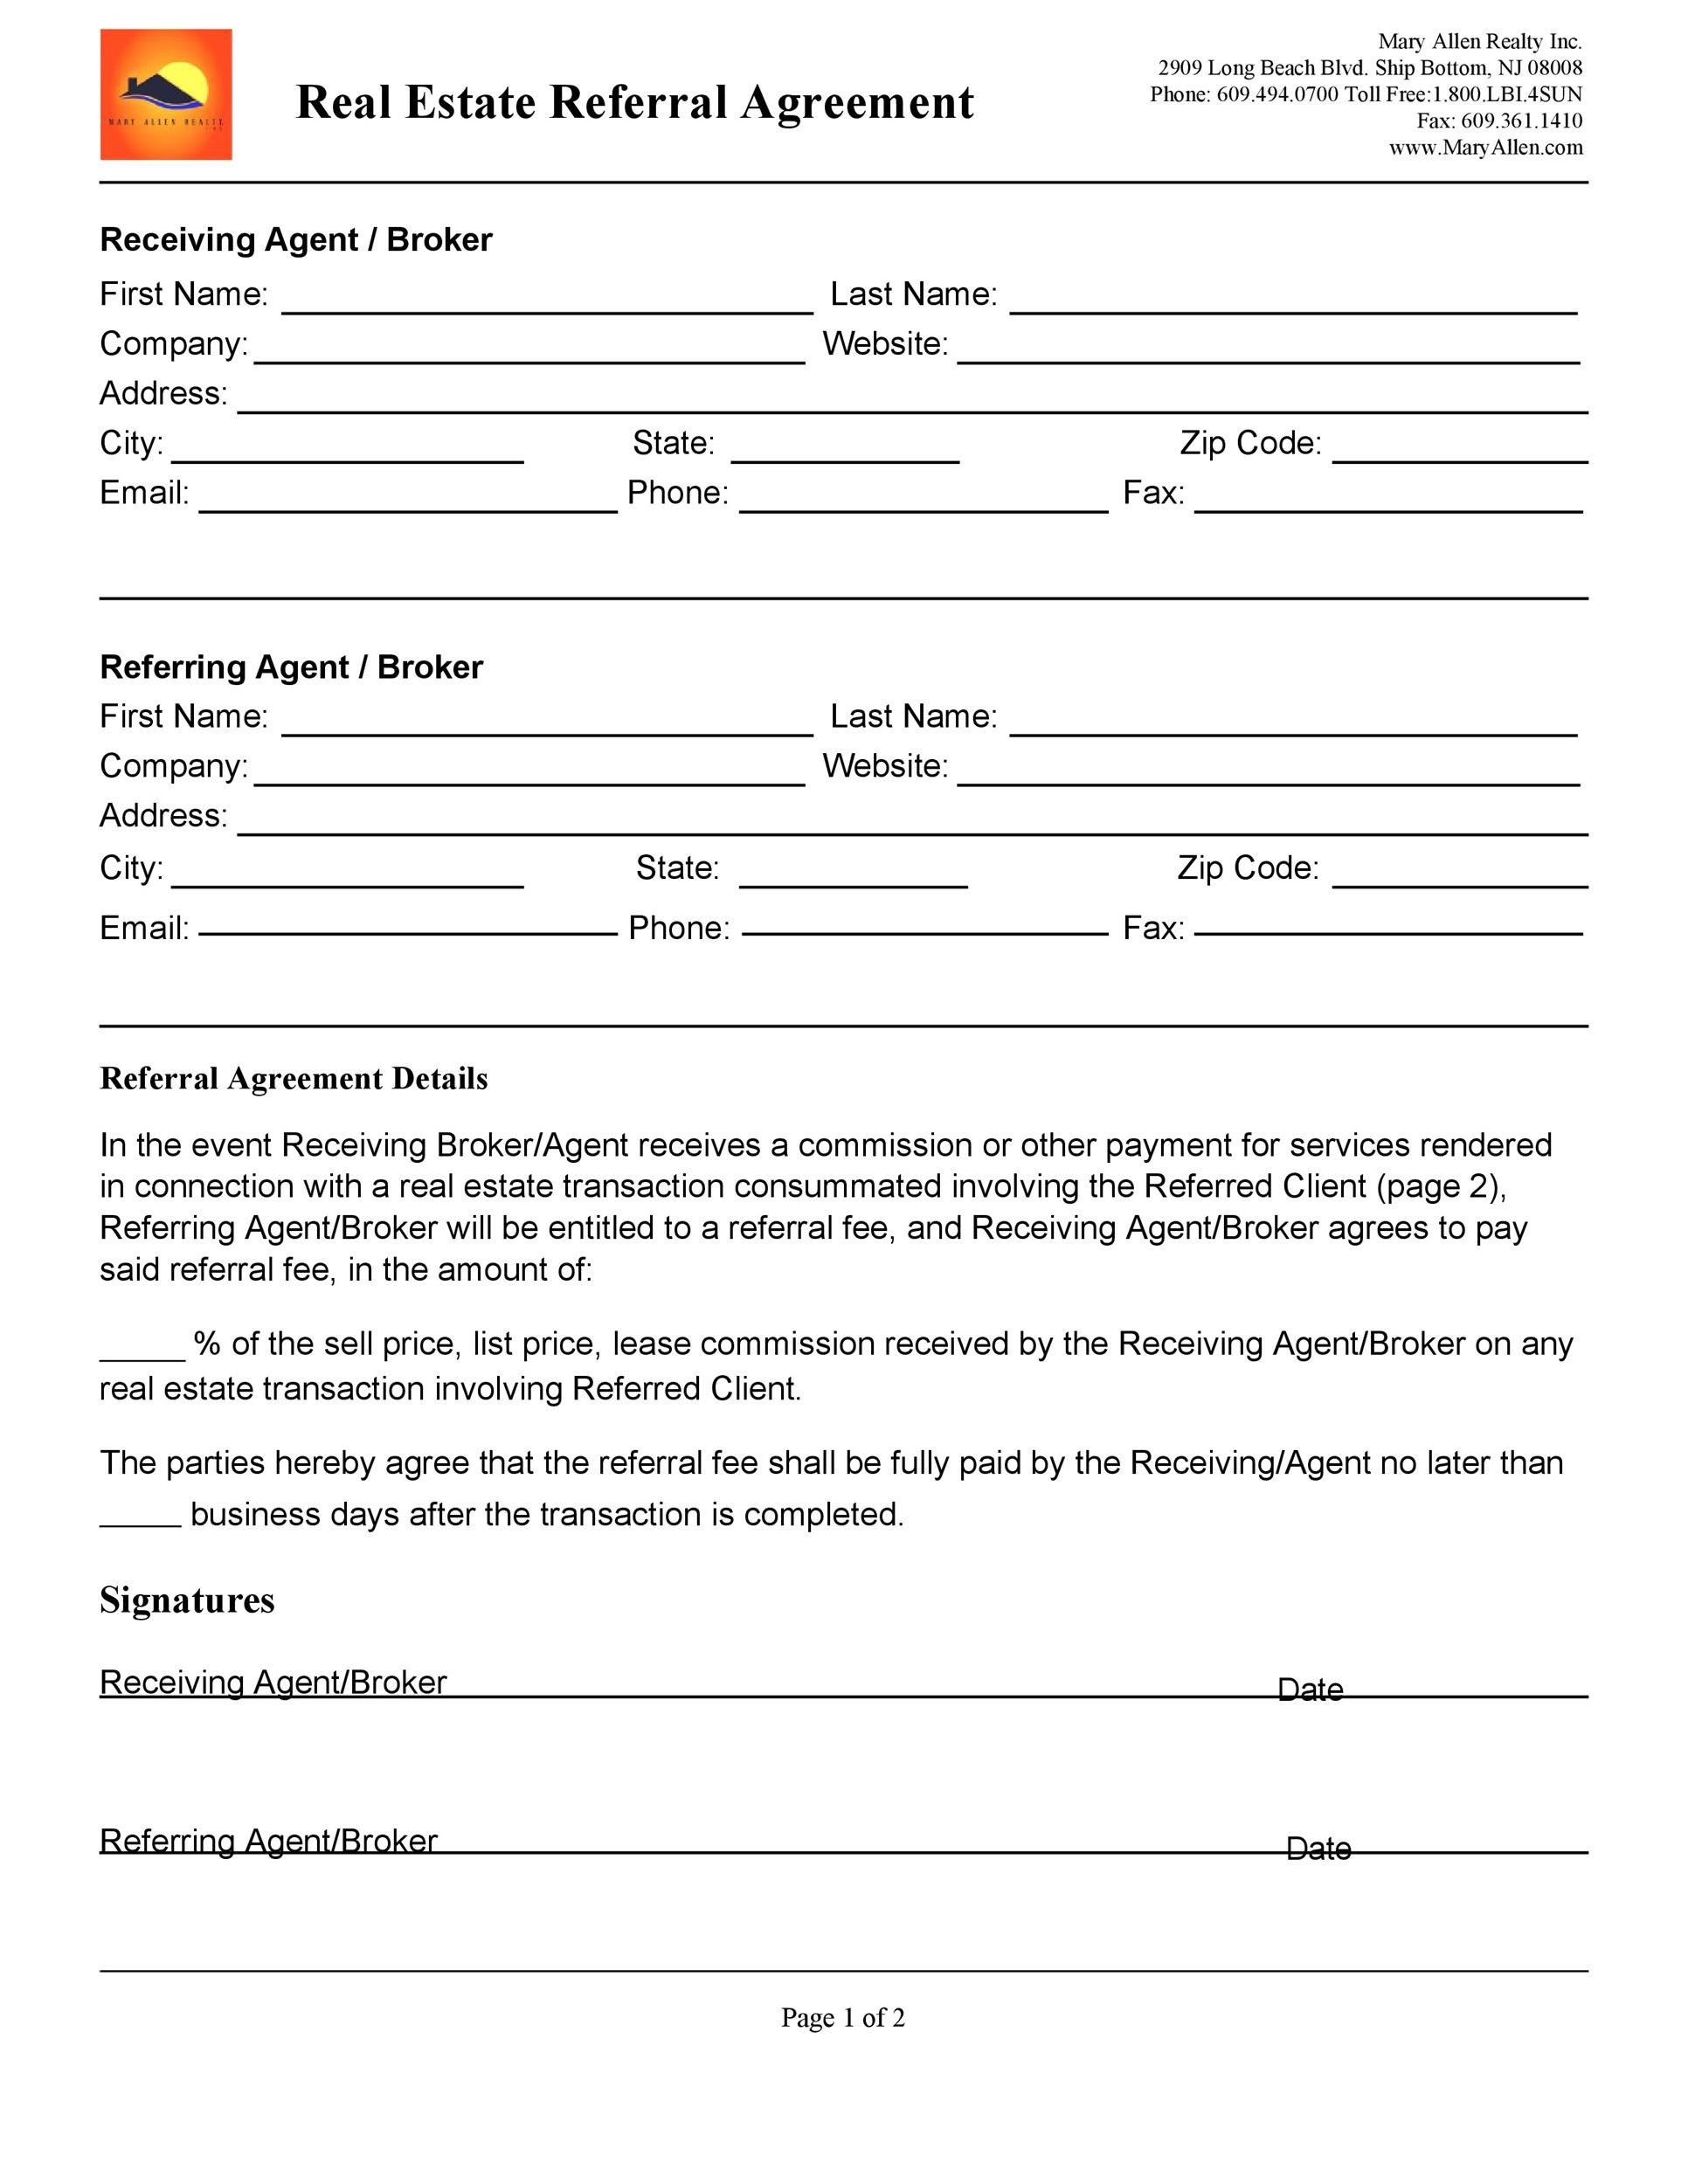 Free referral agreement template 17